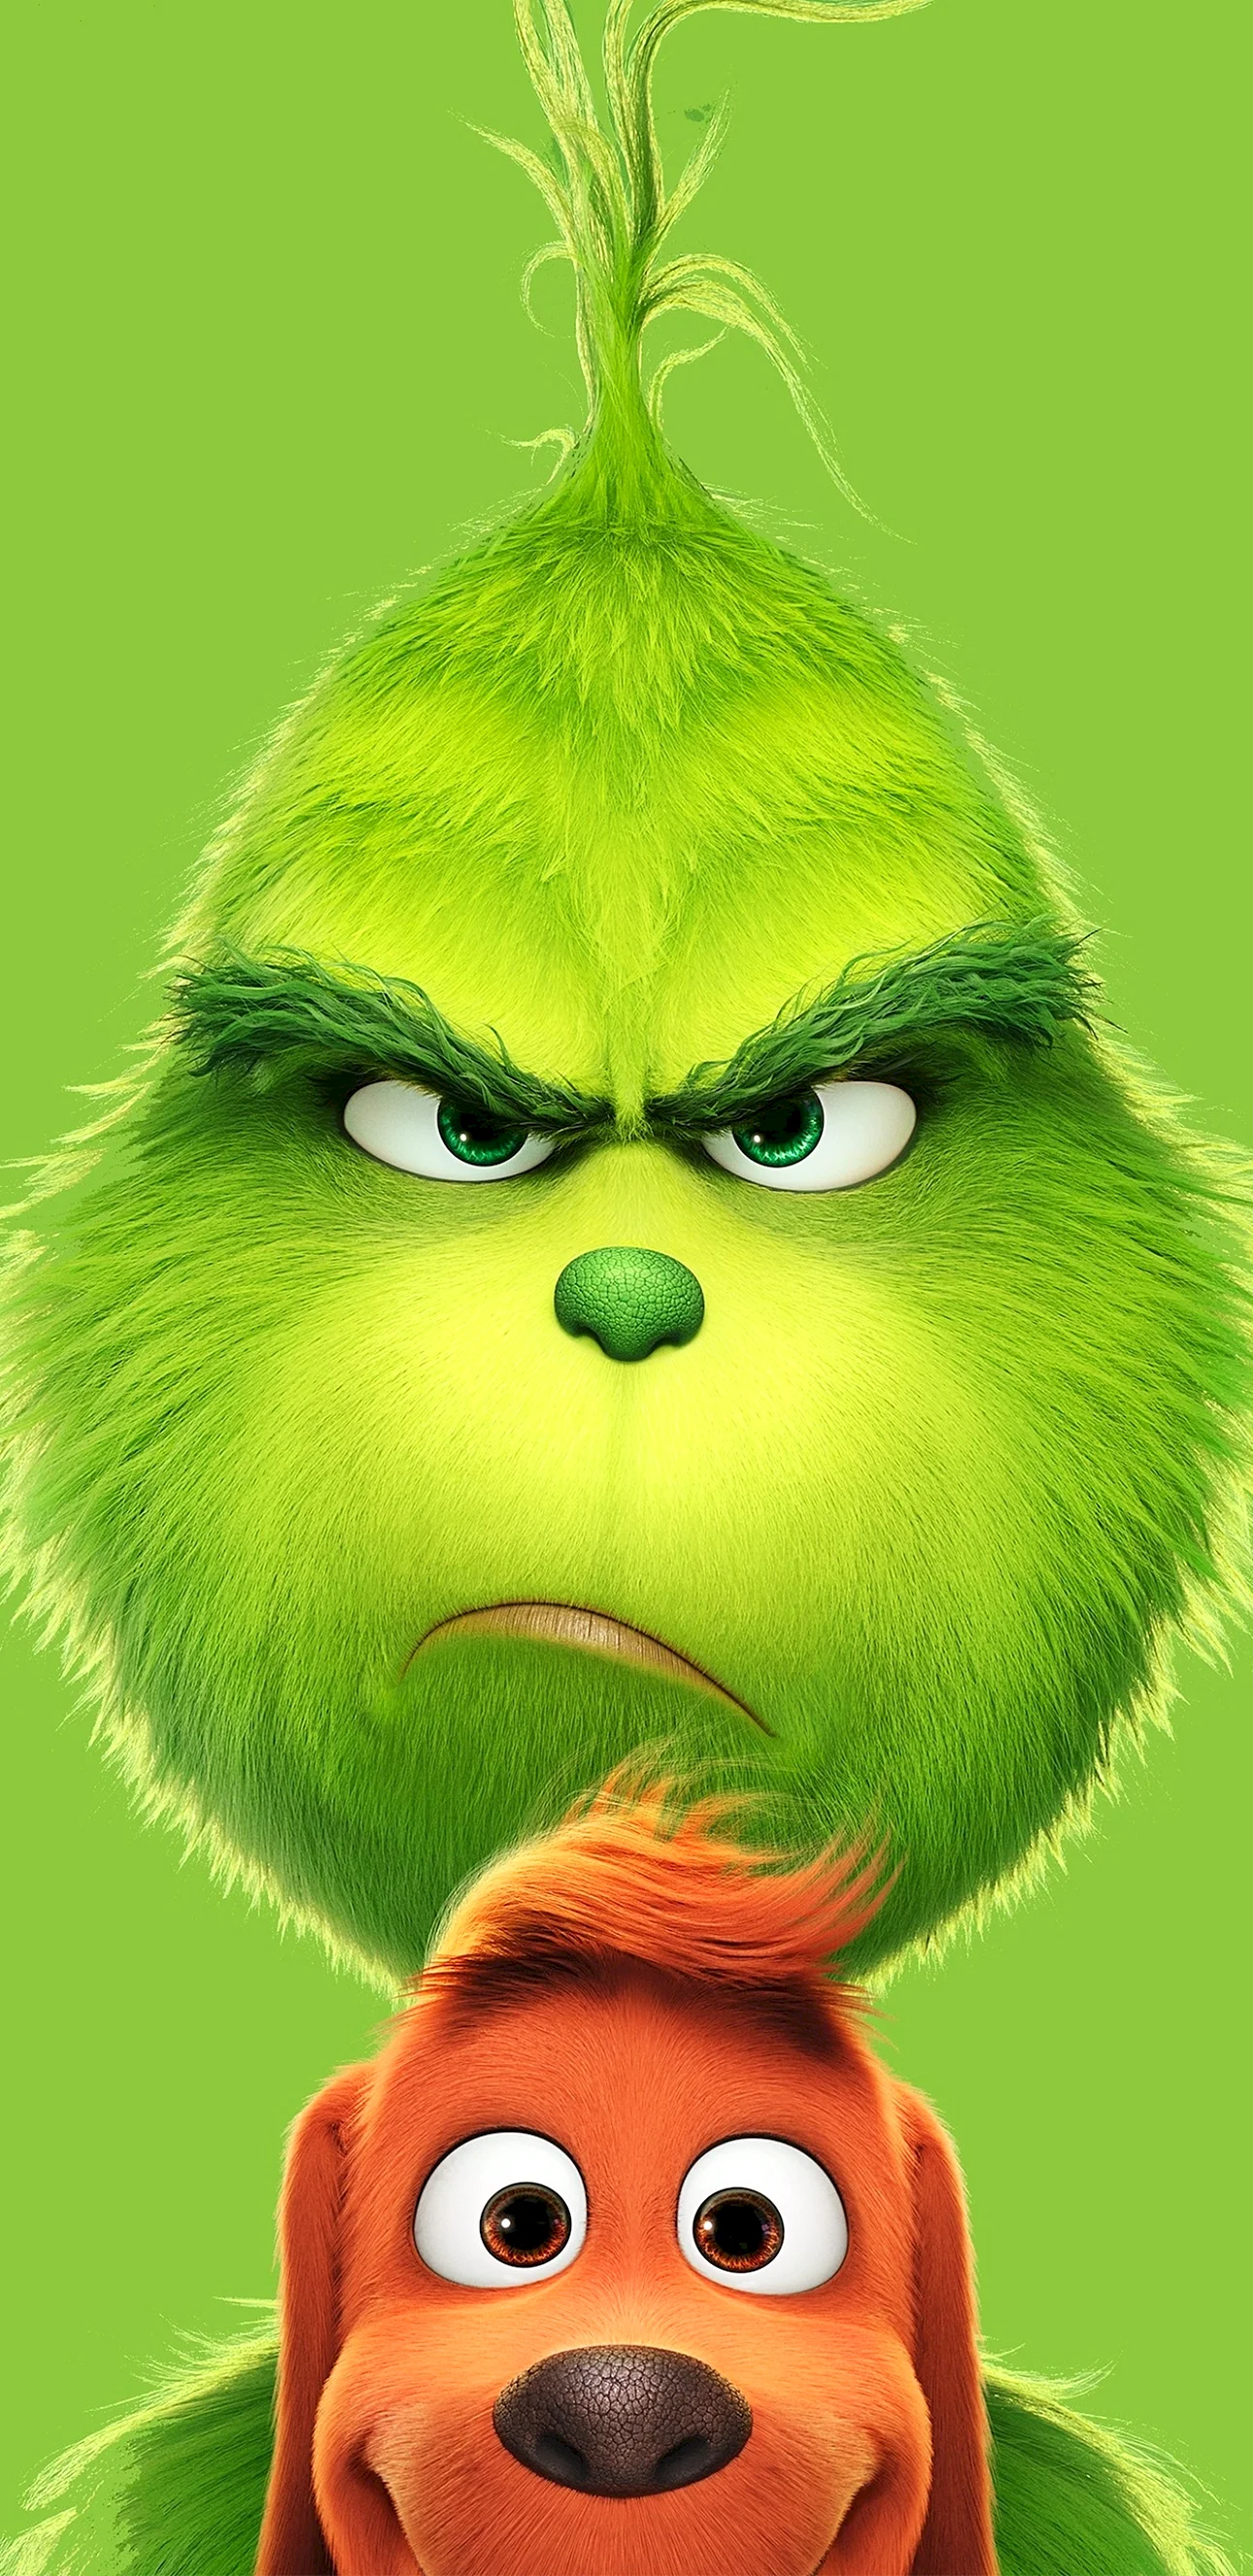 The Grinch 2018 Wallpaper For iPhone